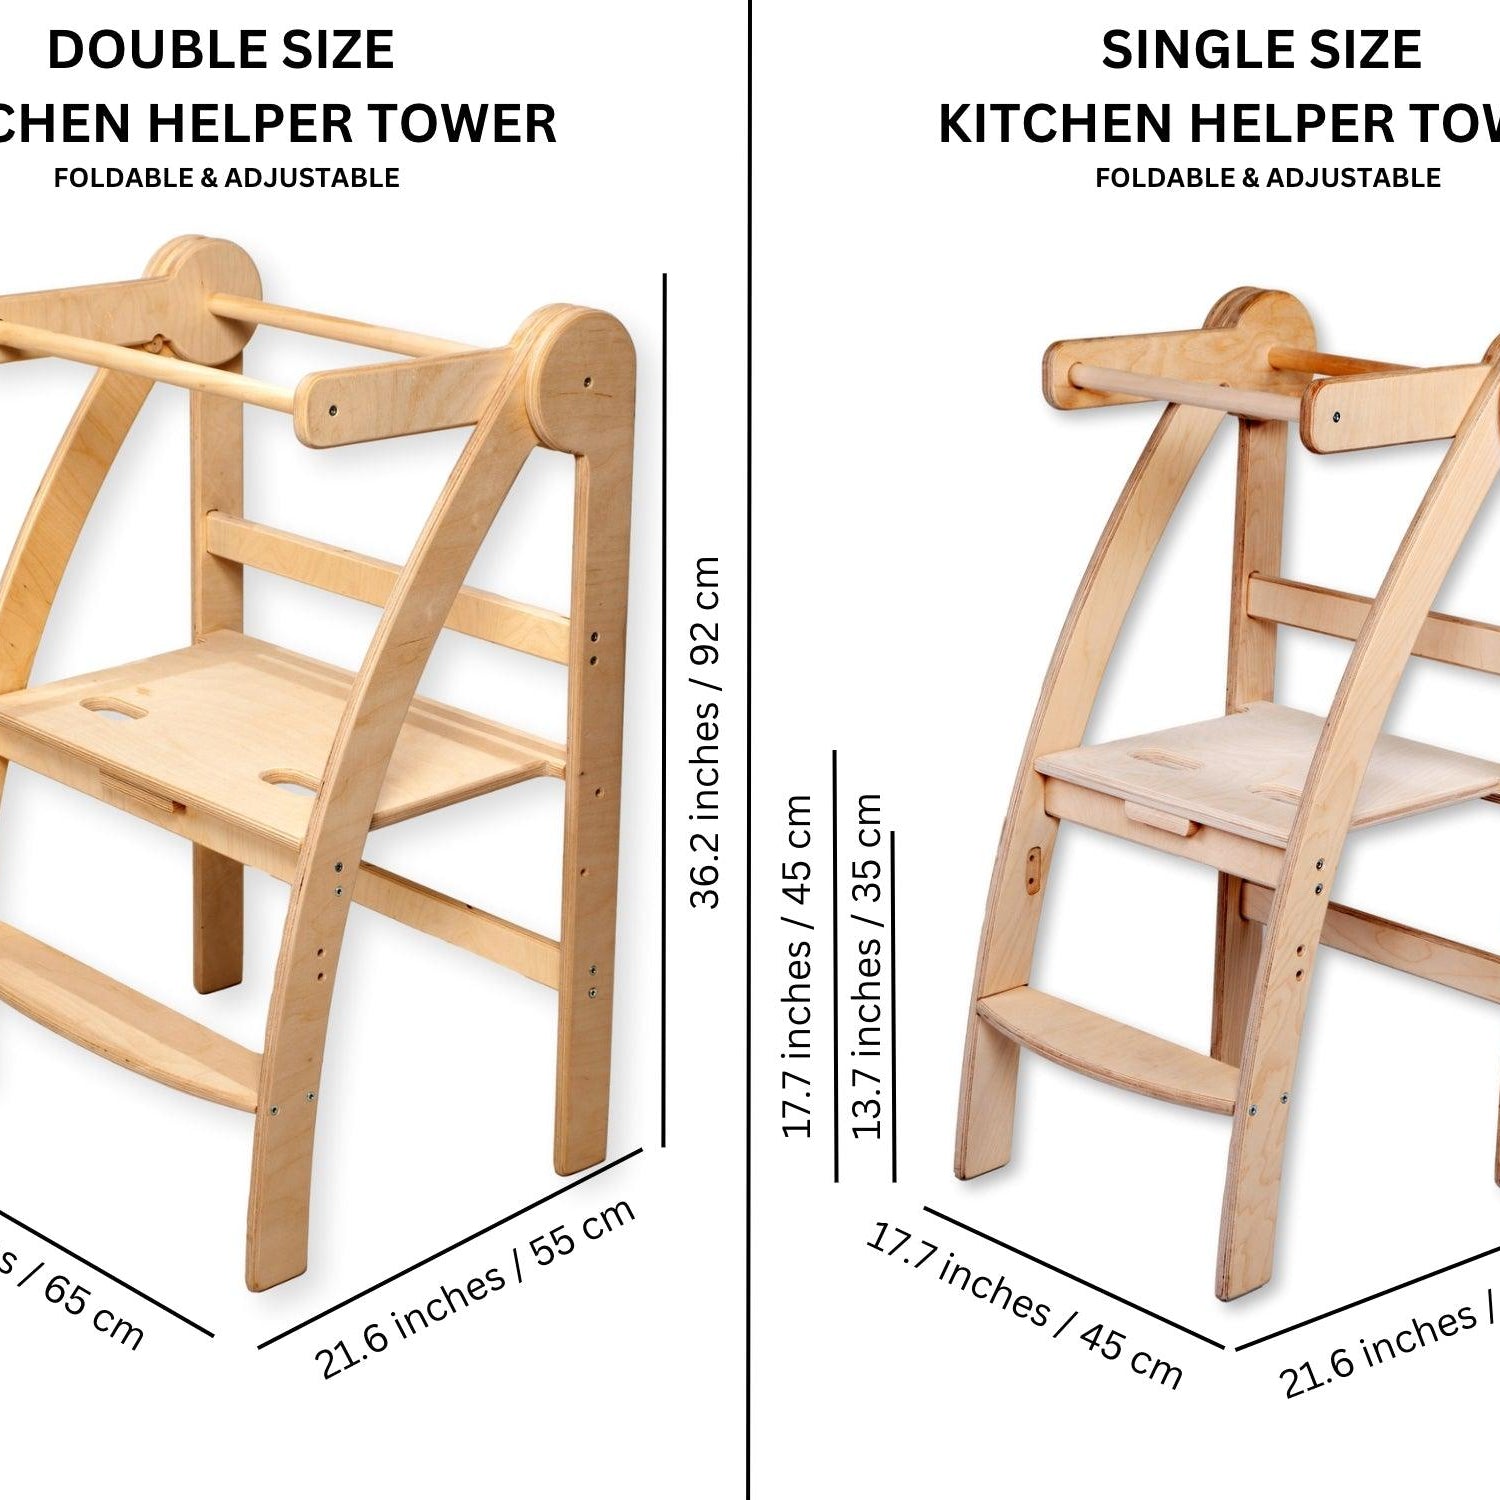 Double Size Foldable Learning Tower - Kidodido